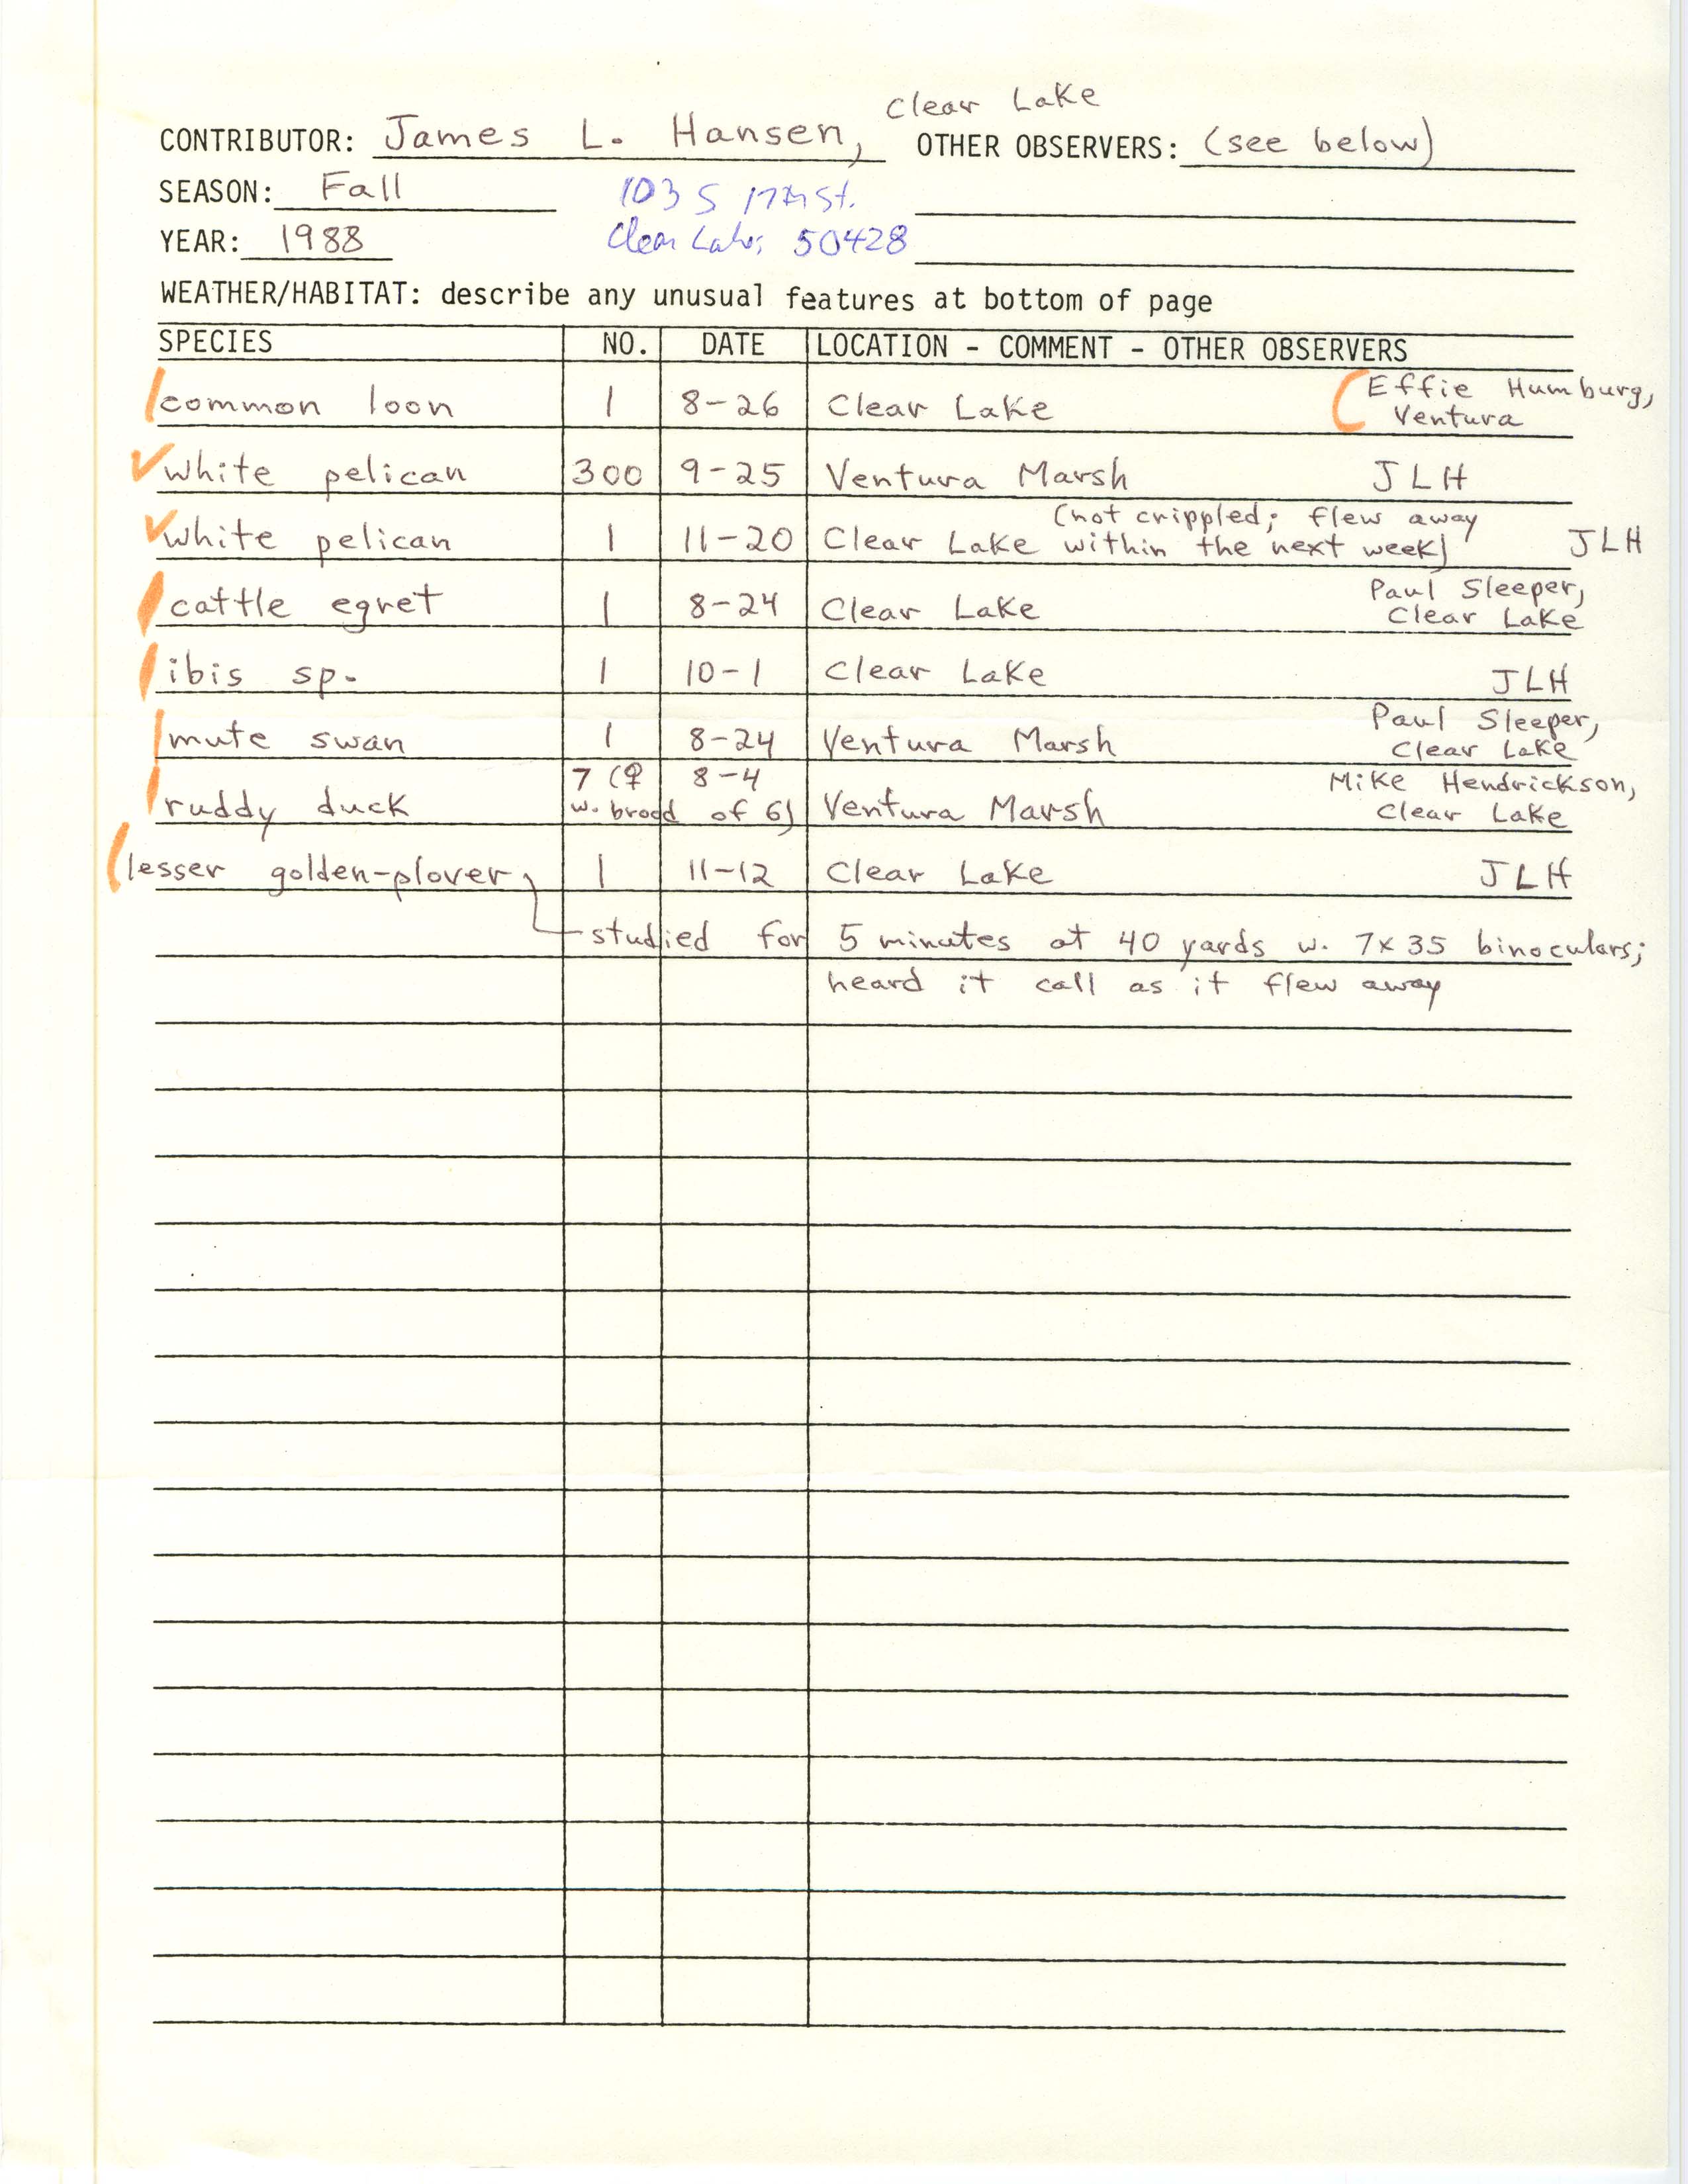 Field notes contributed by James L. Hansen, fall 1988